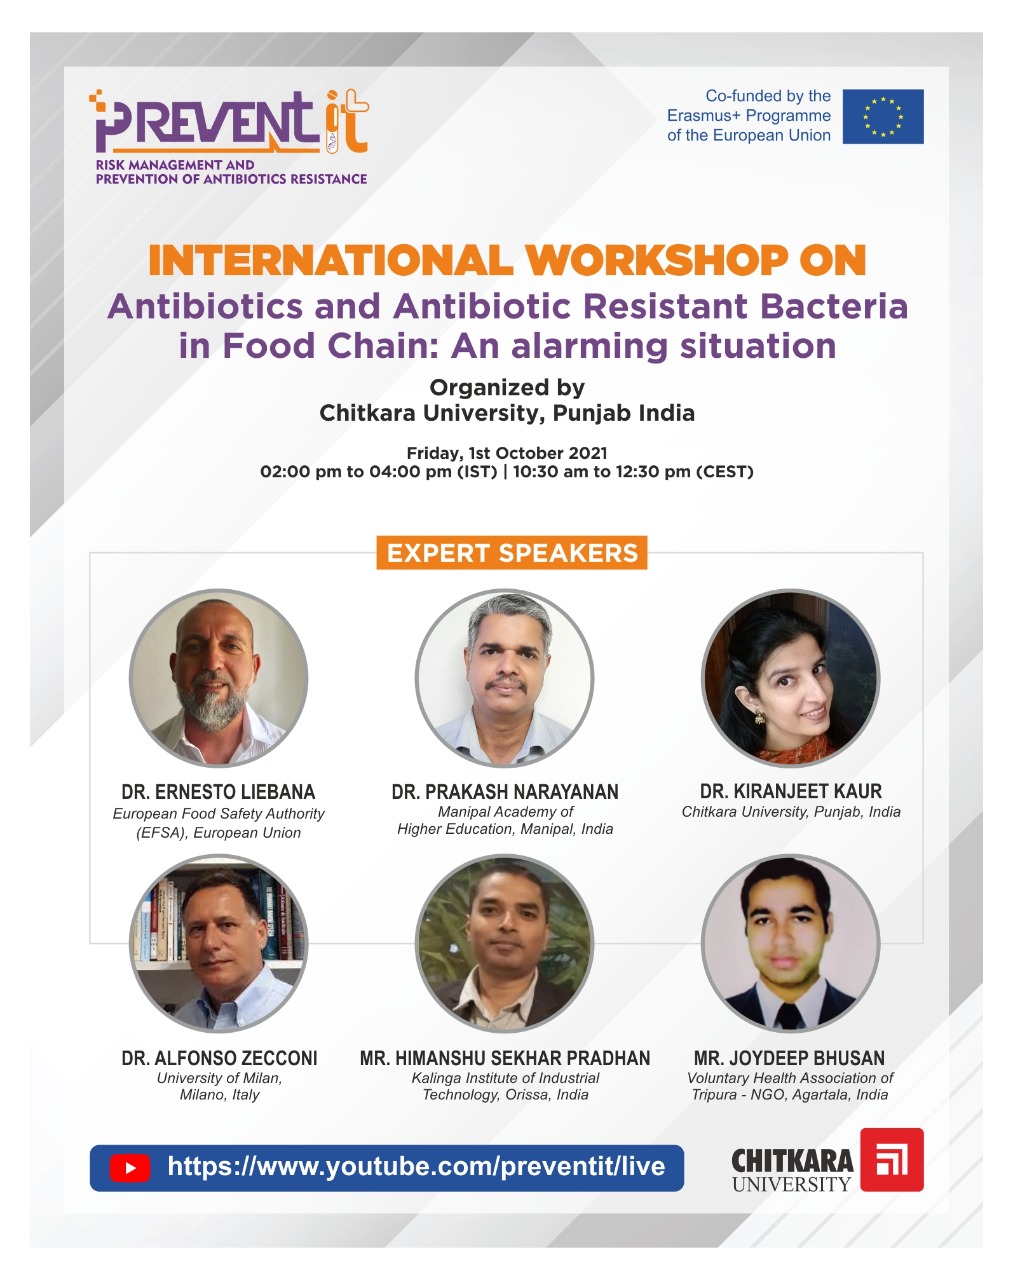 International Workshop on “Antibiotics and Antibiotic Resistant Bacteria in Food Chain: An Alarming Situation” by Chitkara University